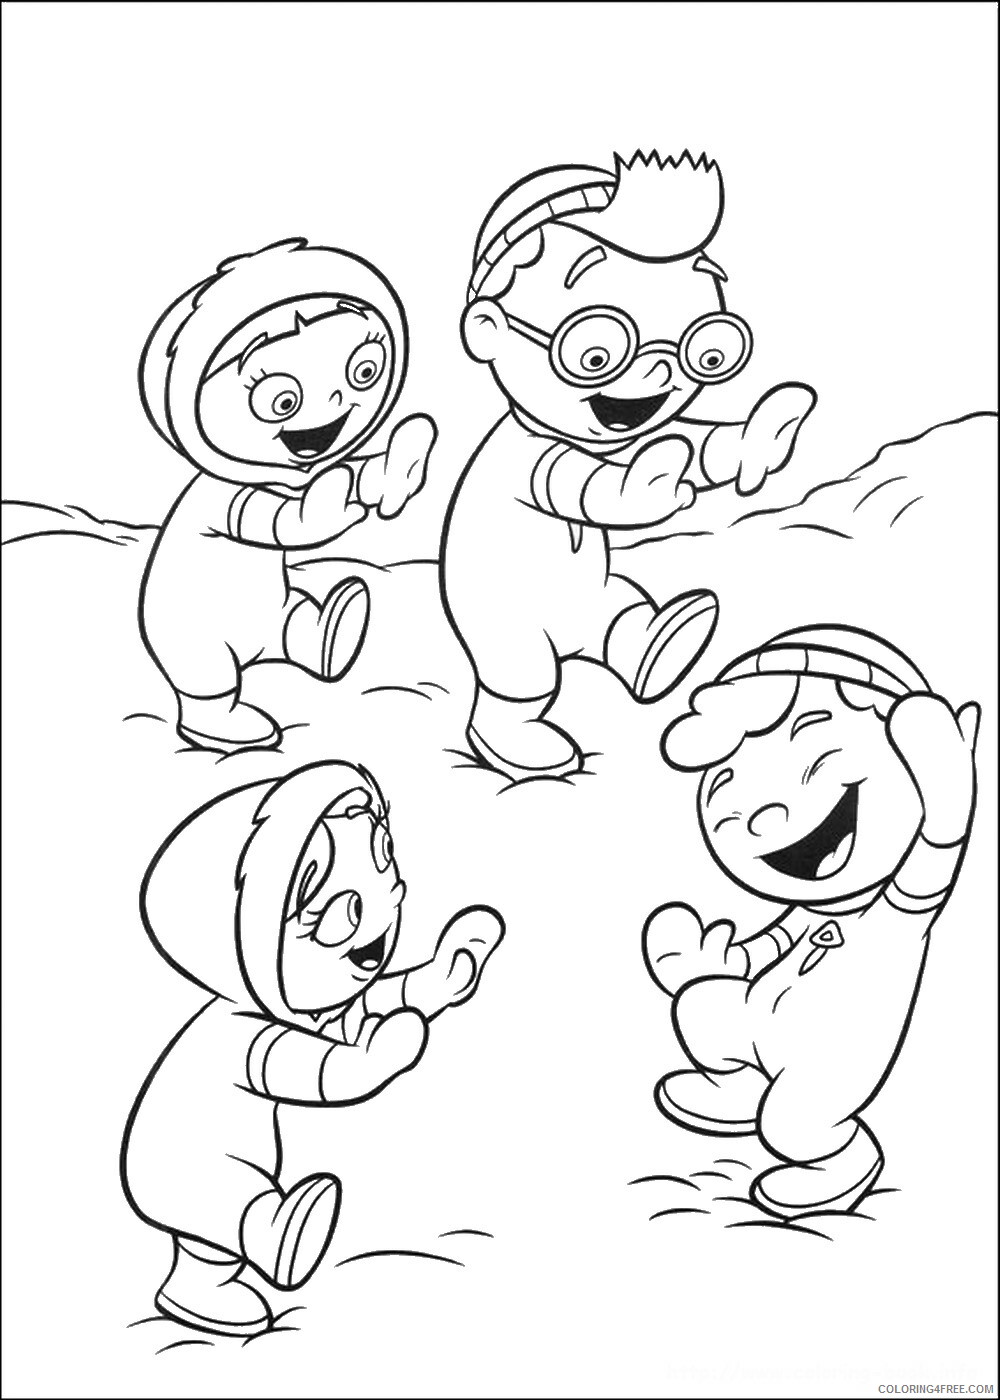 Little Einsteins Coloring Pages TV Film little_einsteins_12 Printable 2020 04476 Coloring4free